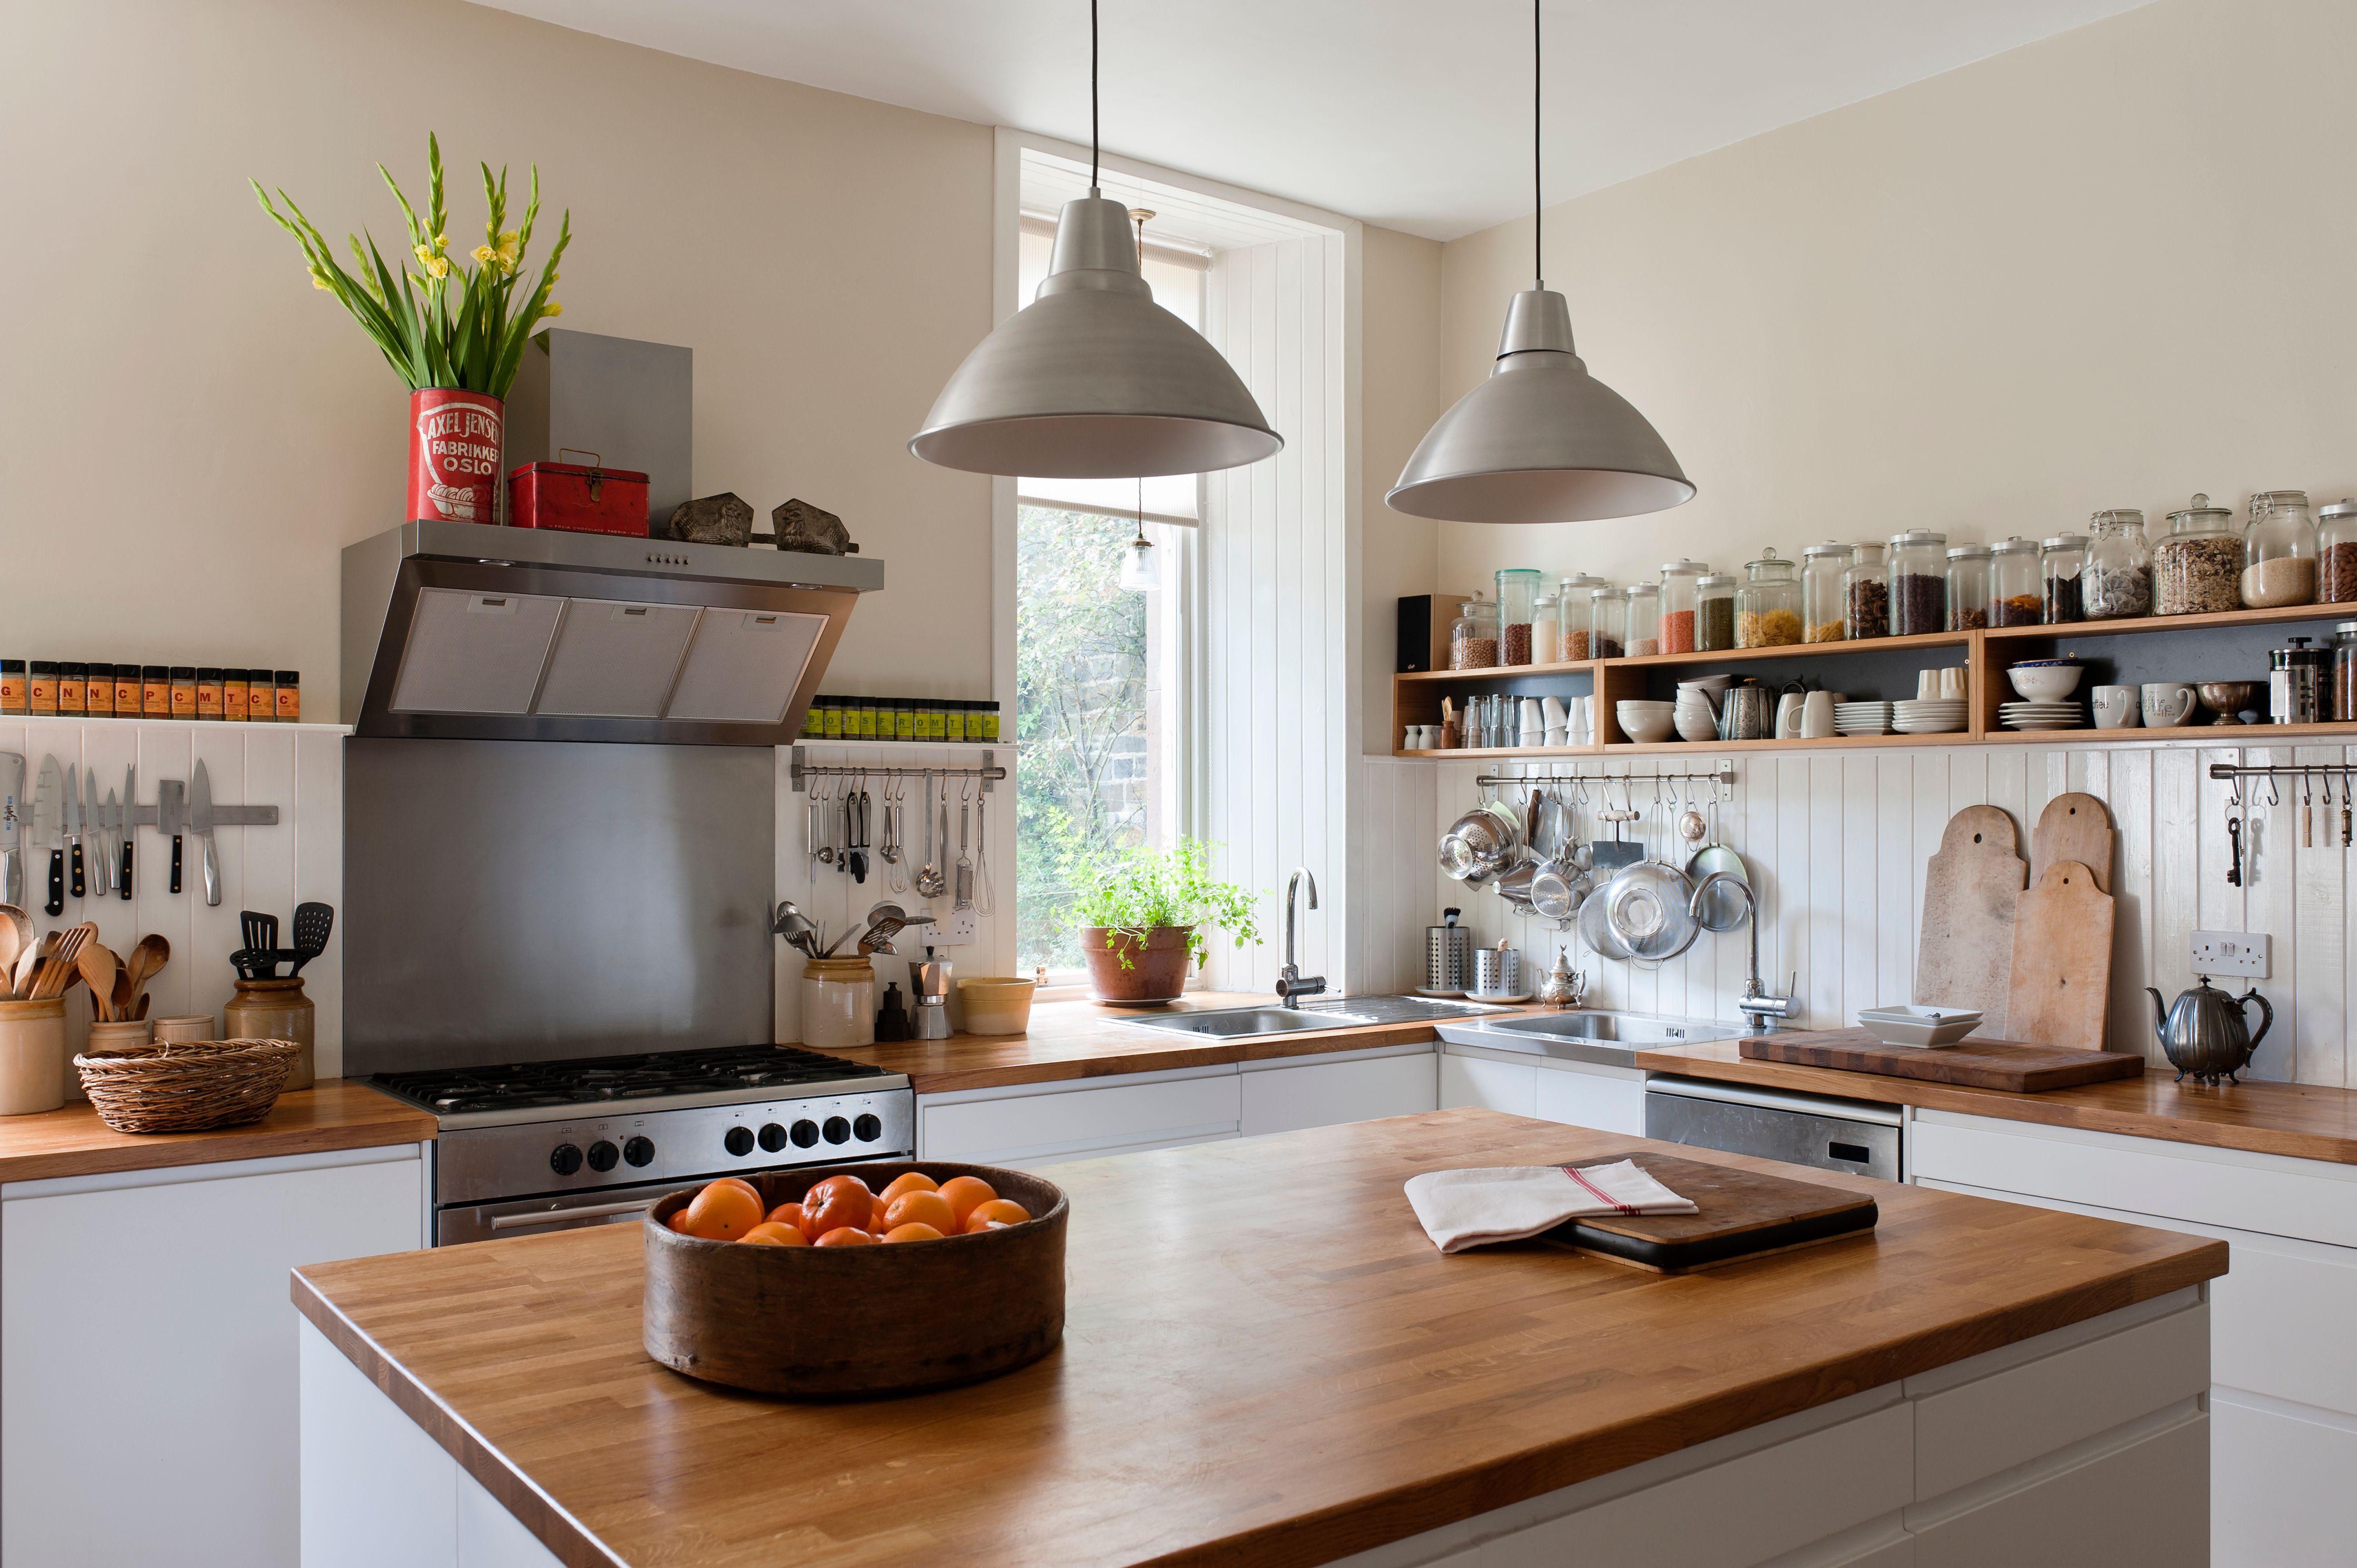 A modern kitchen with tomatoes on the table. | Source: Getty Images